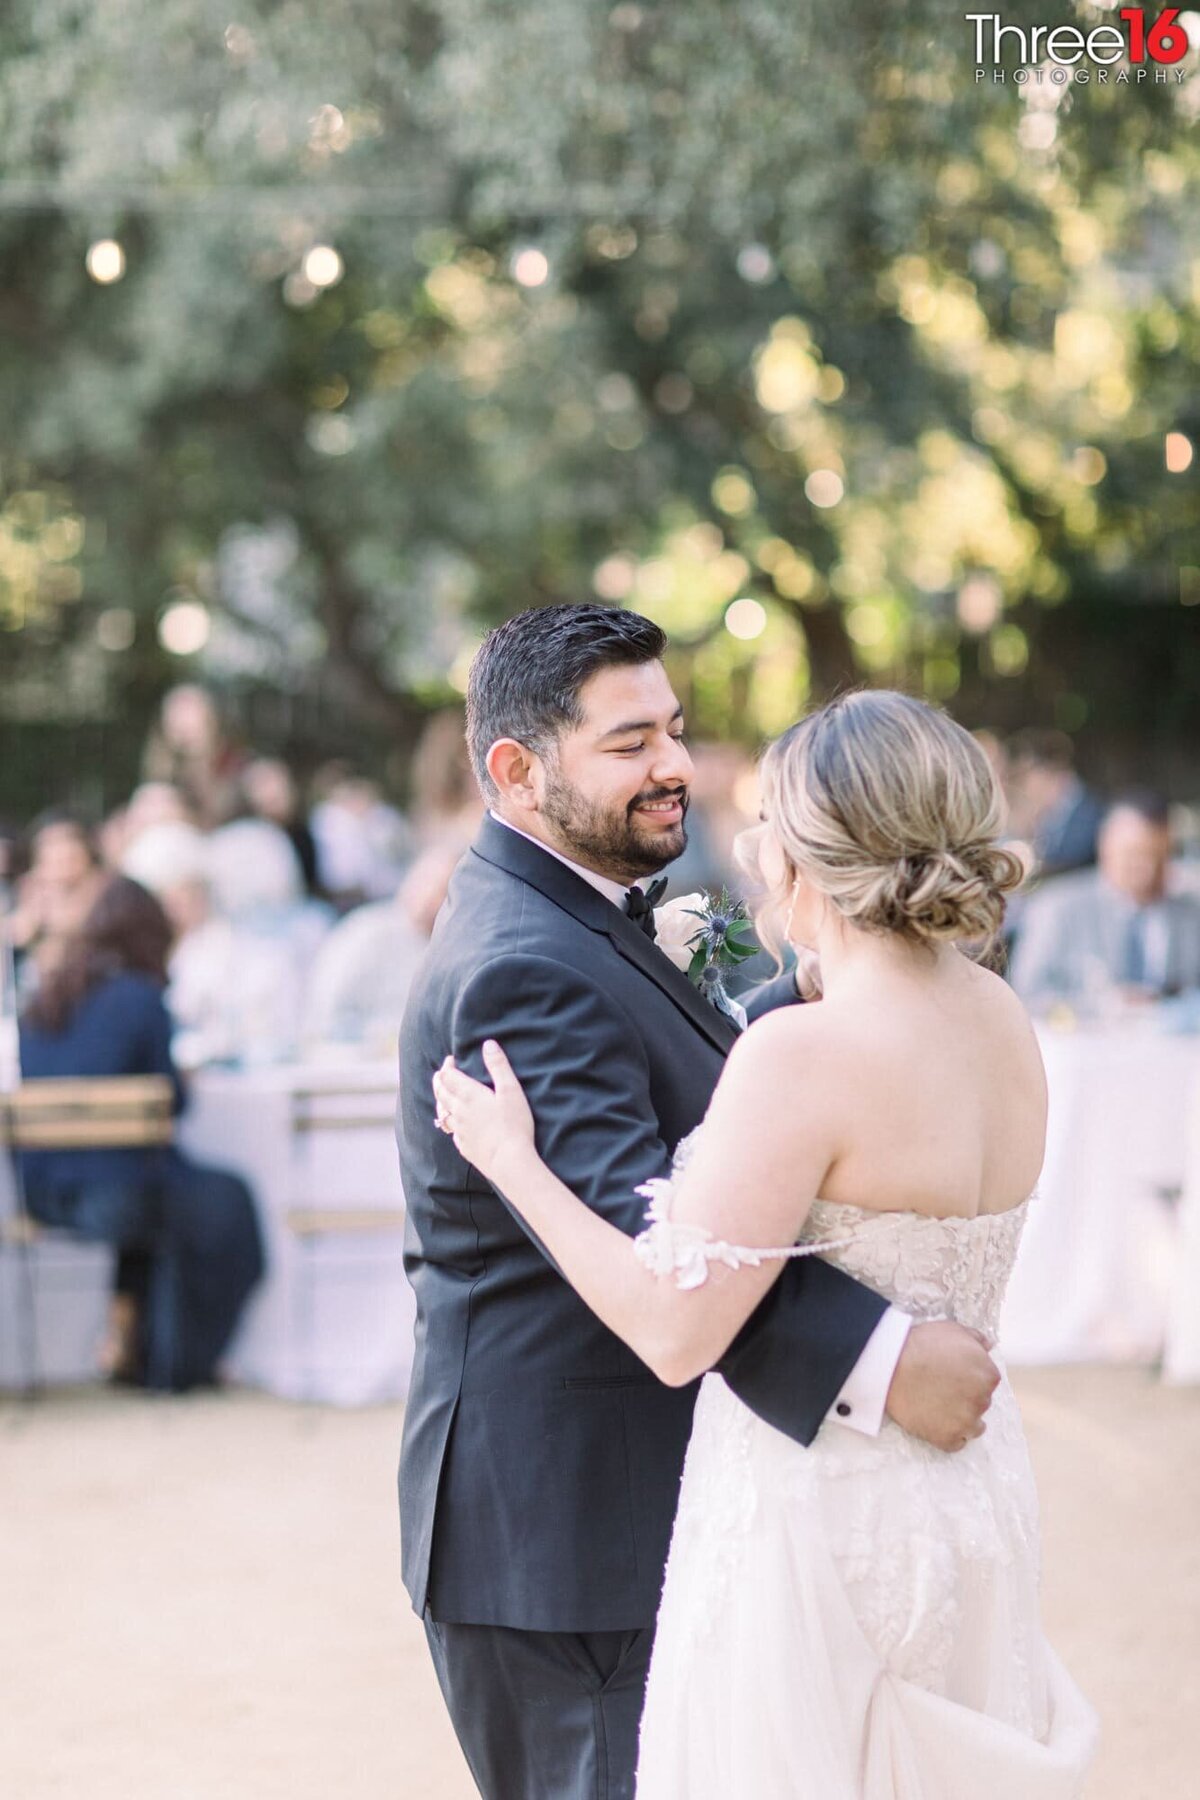 Bride and Groom's first dance as a married couple